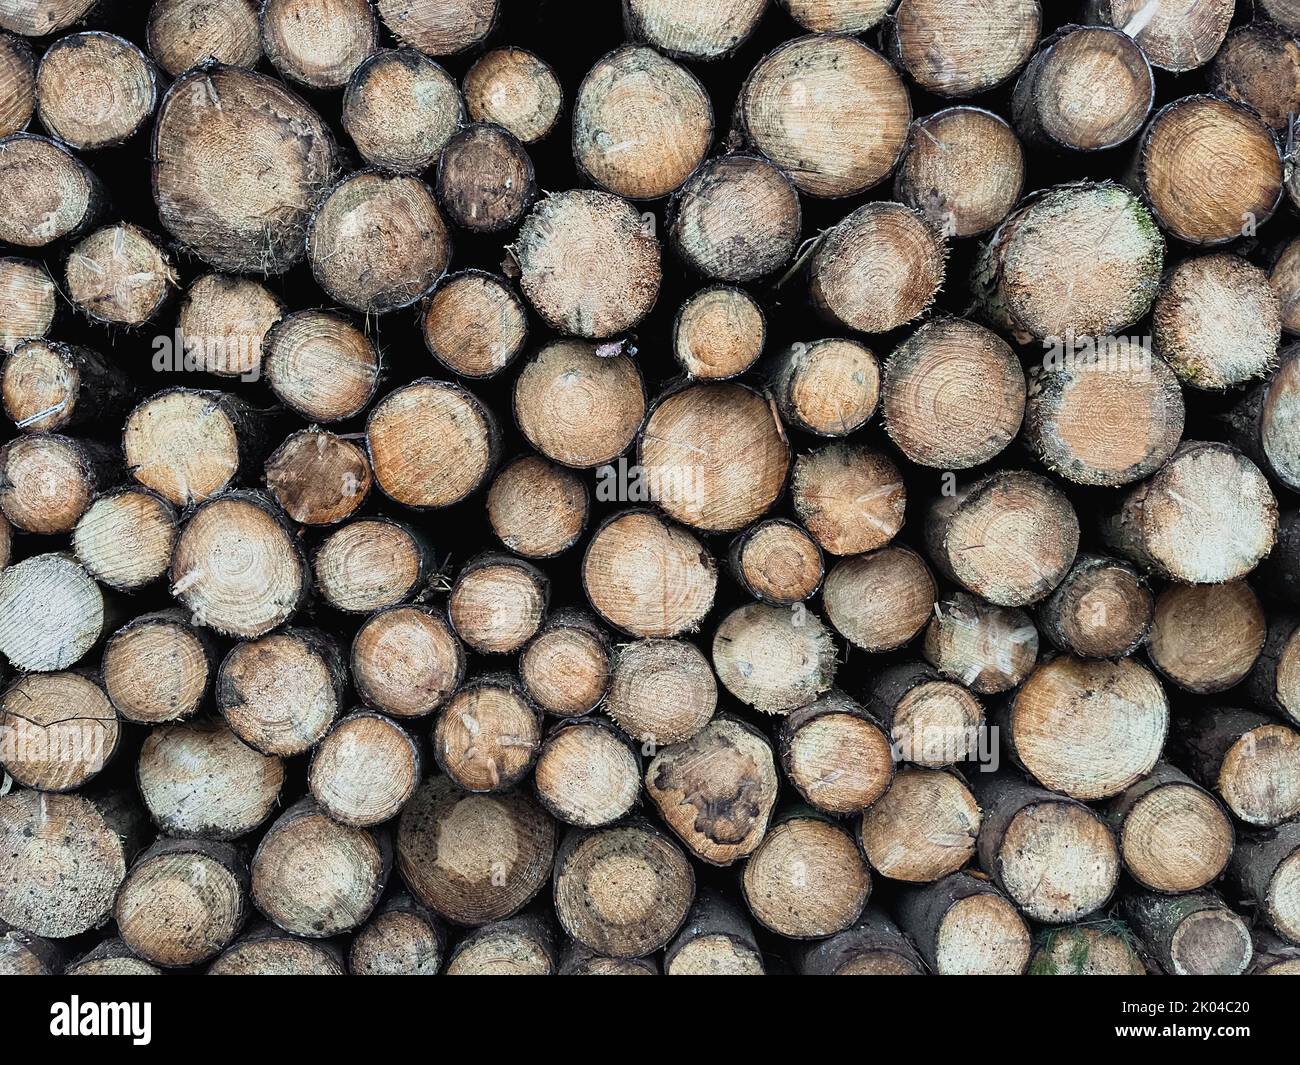 neatly cut stack of wood Stock Photo